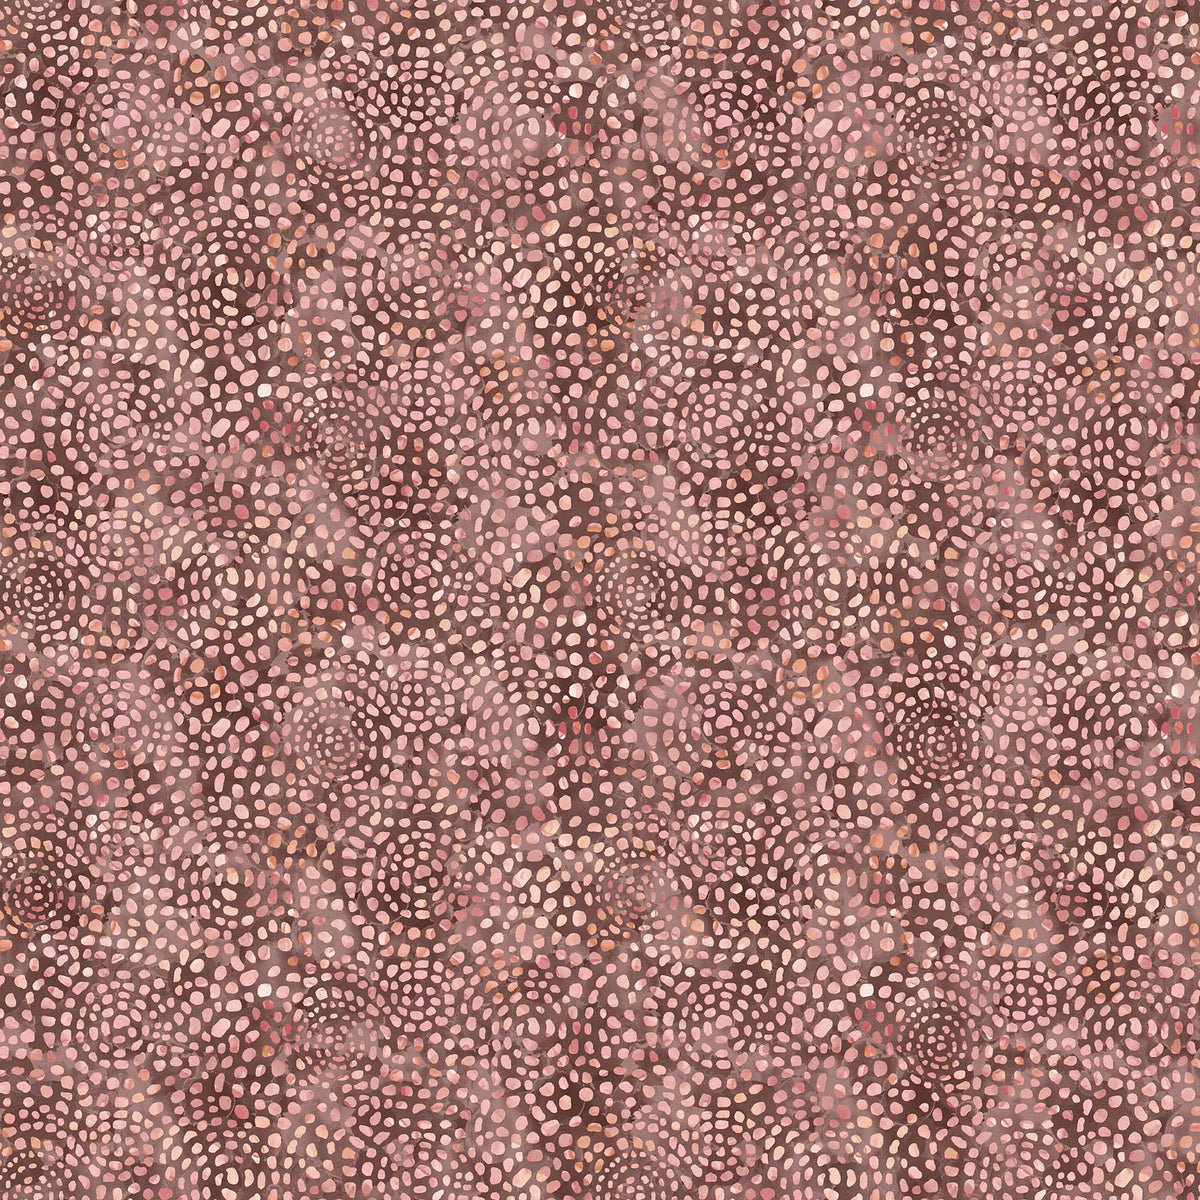 Dragonfly Dreams Quilt Fabric - Circular Texture in Taupe/Multi - DP24832-14